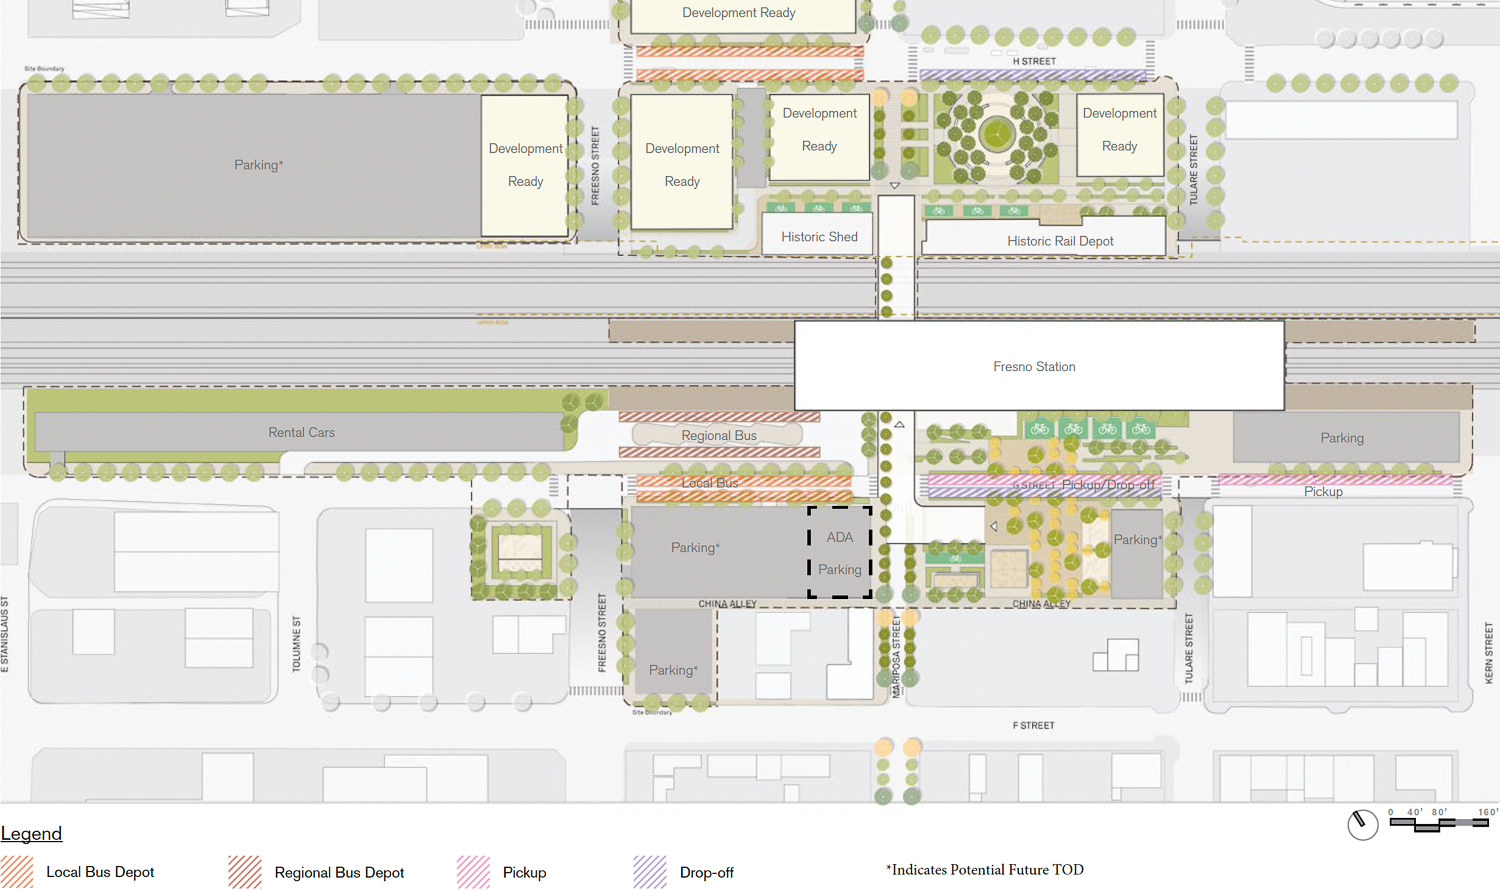 Fresno Station site map, illustration by Foster + Partners